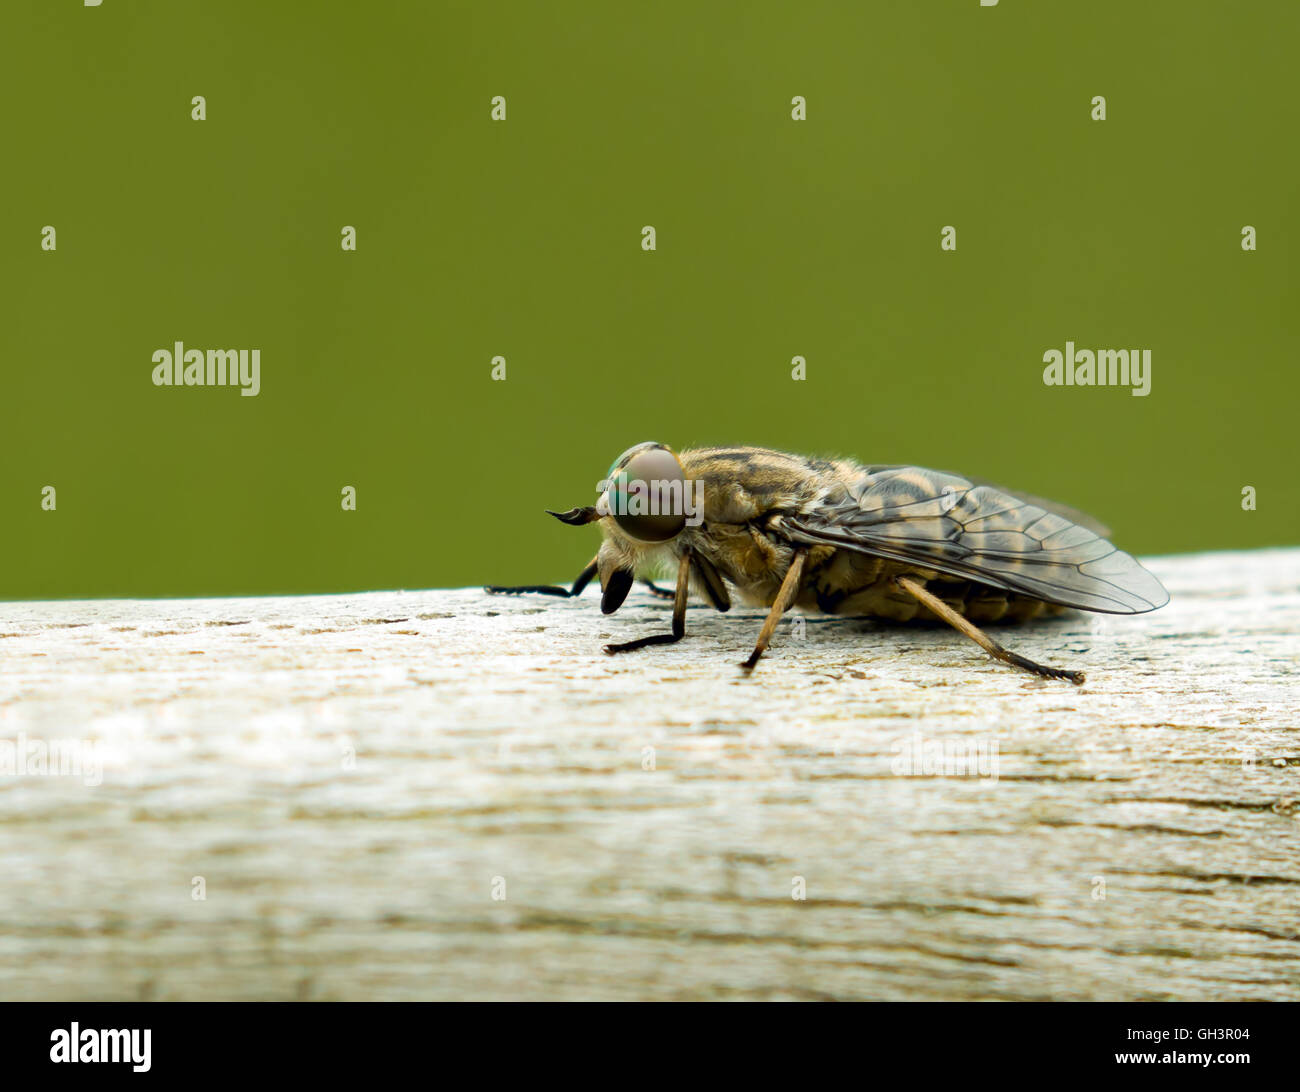 Close-up of biting Band-eyed Brown Horse-fly. Stock Photo